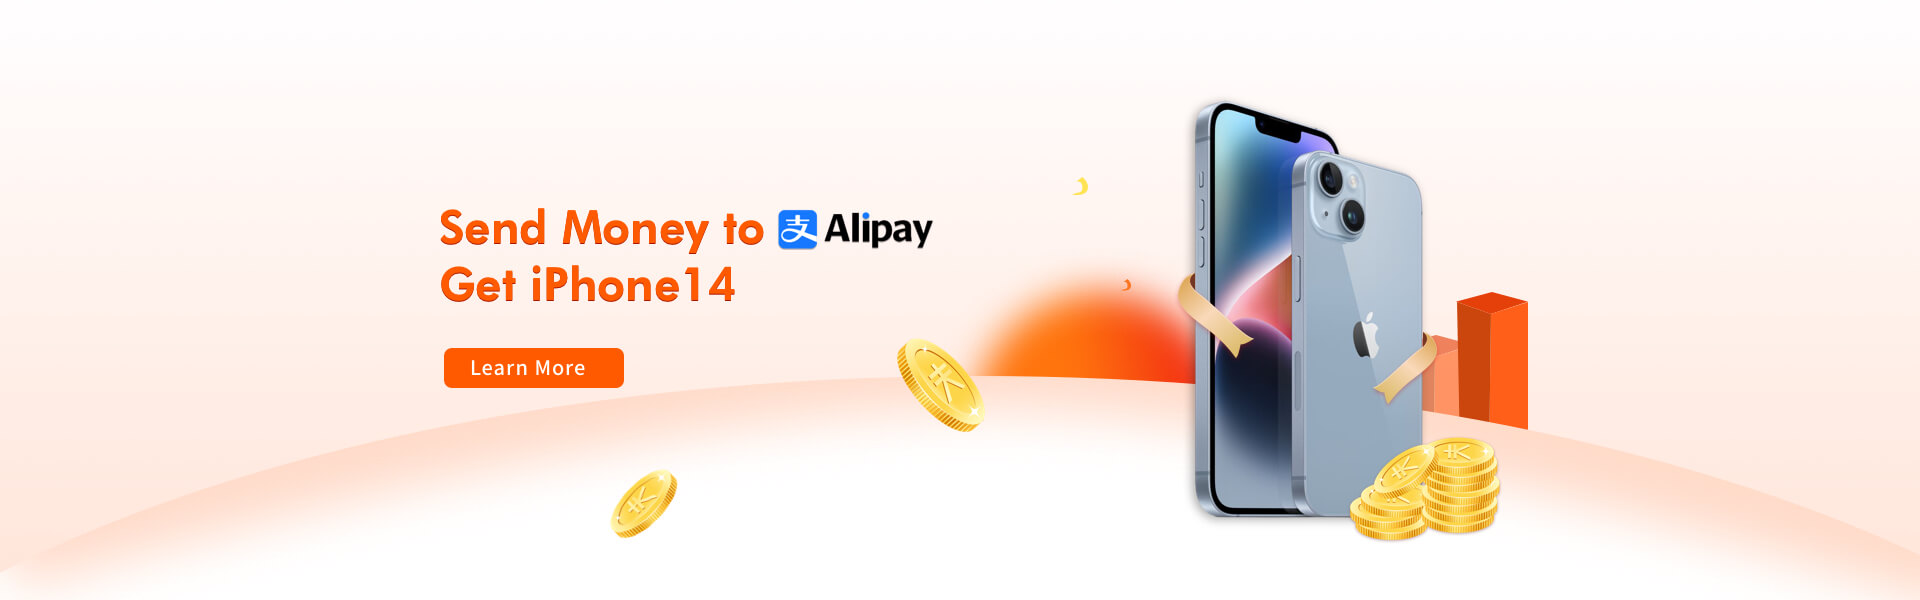 Epay supports remit to Alipay, remit now you can win iPhone